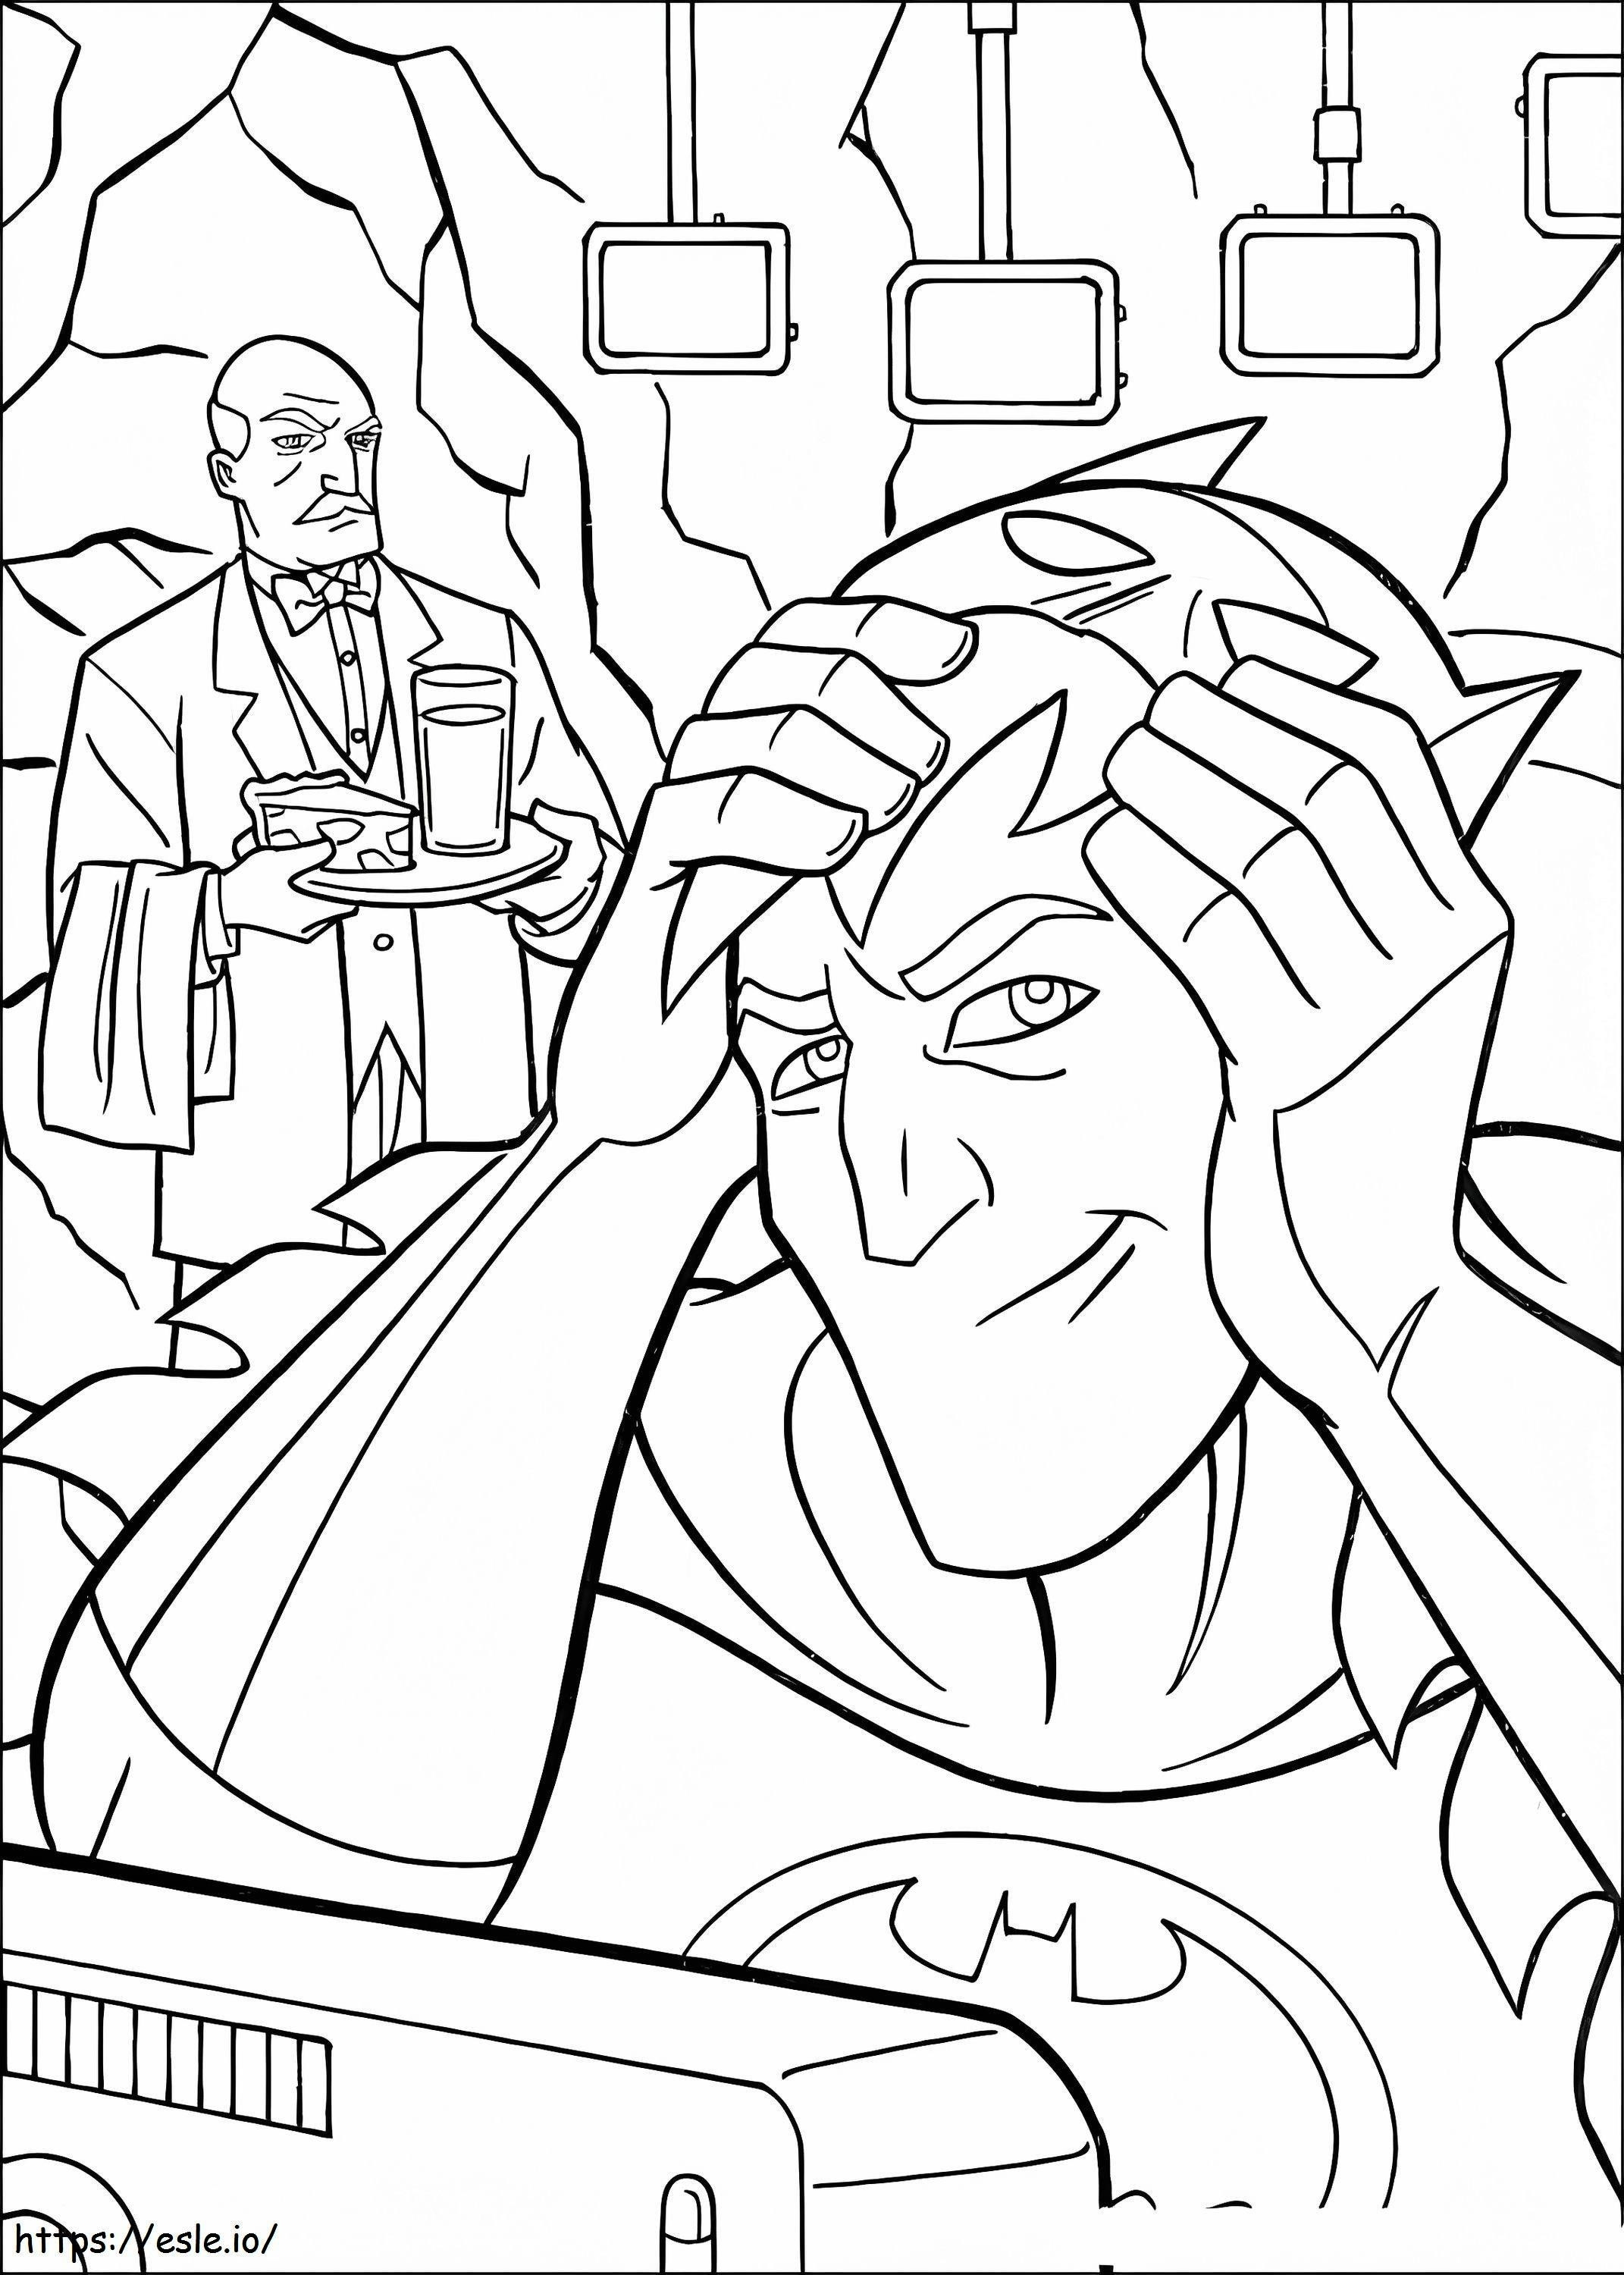 Batman With Alfred coloring page